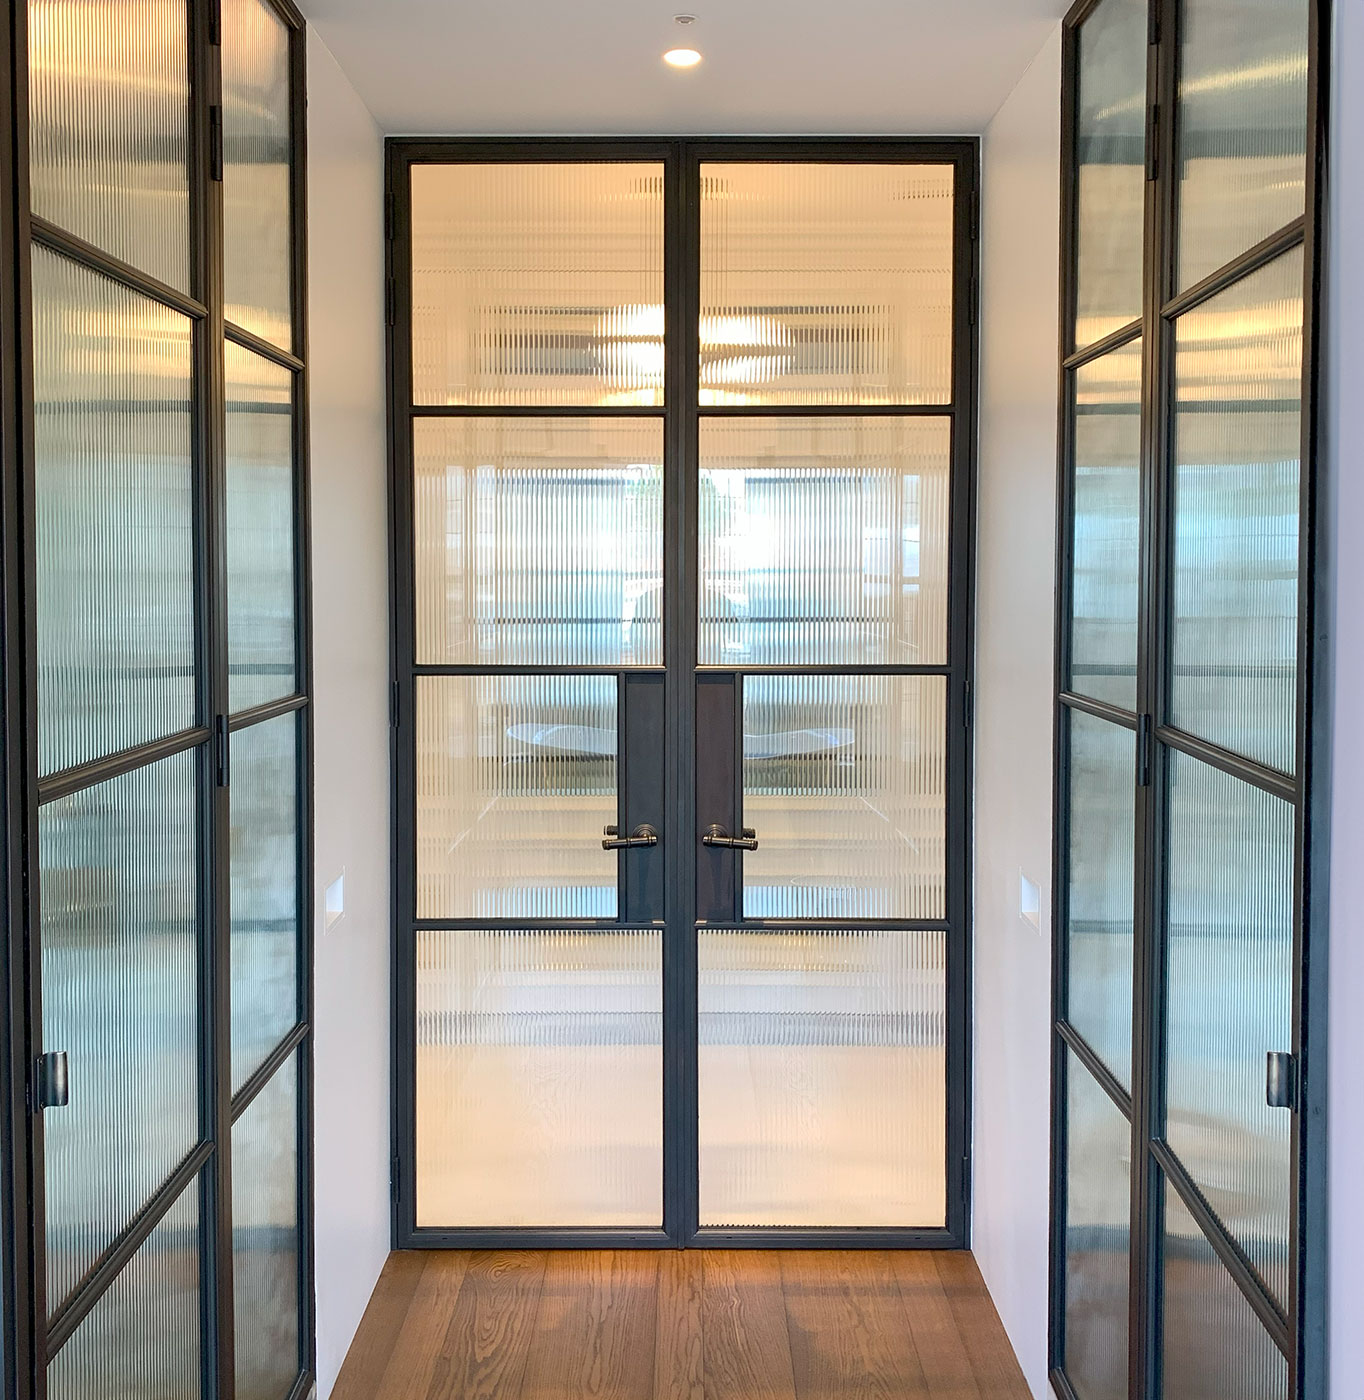 Enhancing Interior Spaces with Internal Glazed Doors